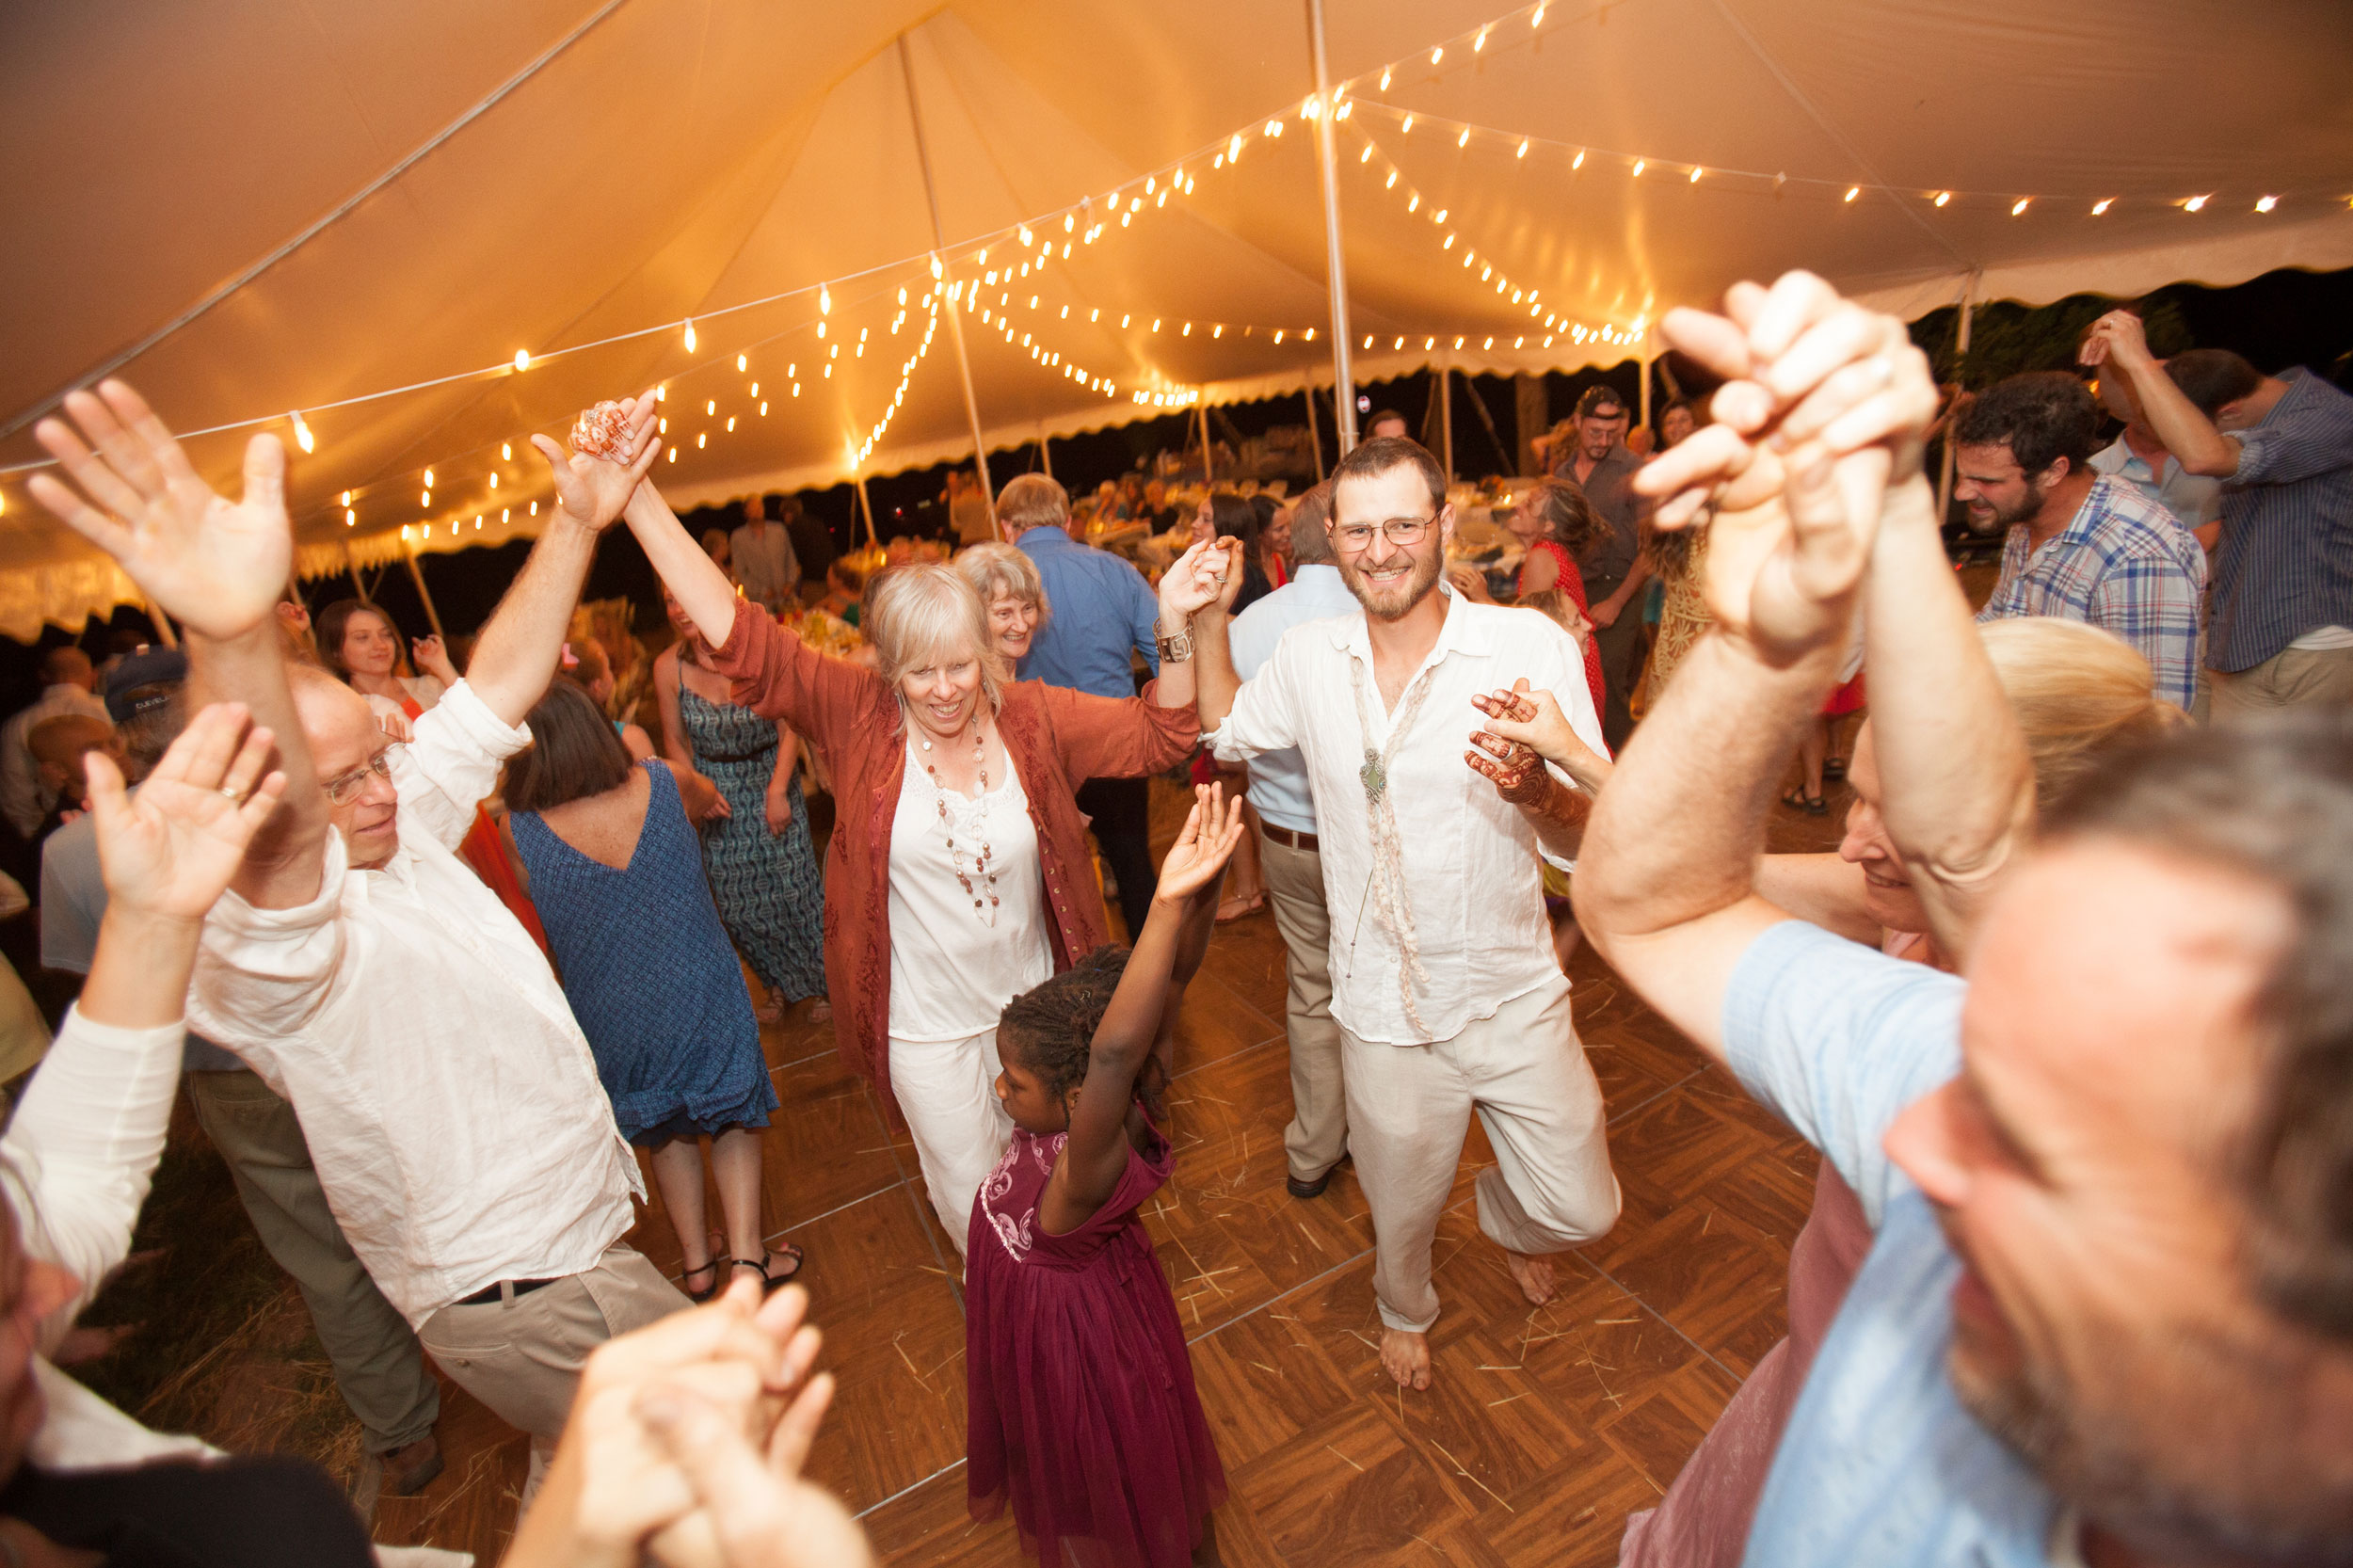 Dance party at a wedding reception